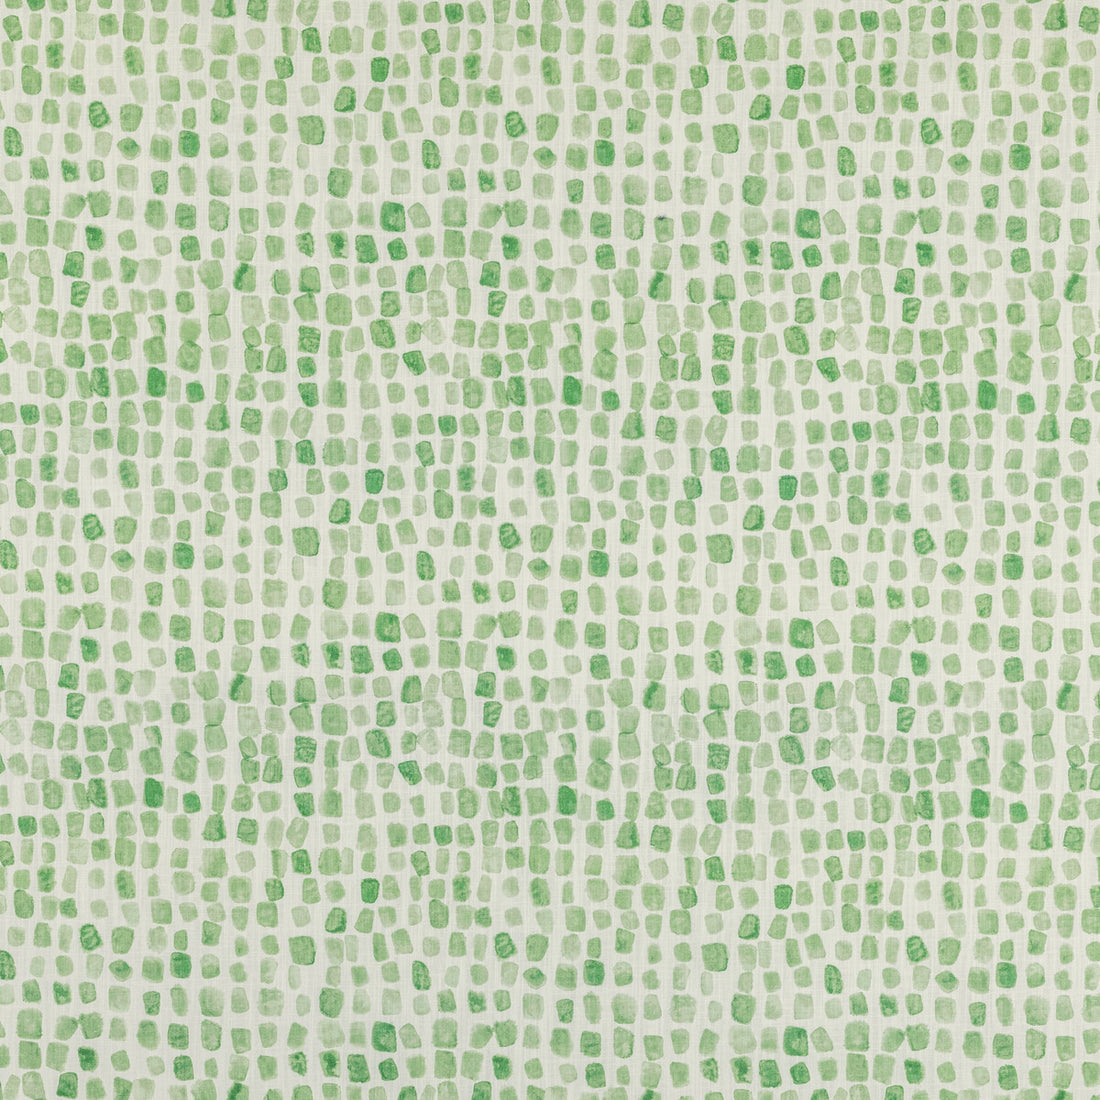 Shodo Path fabric in grass color - pattern SHODO PATH.3.0 - by Kravet Basics in the Monterey collection